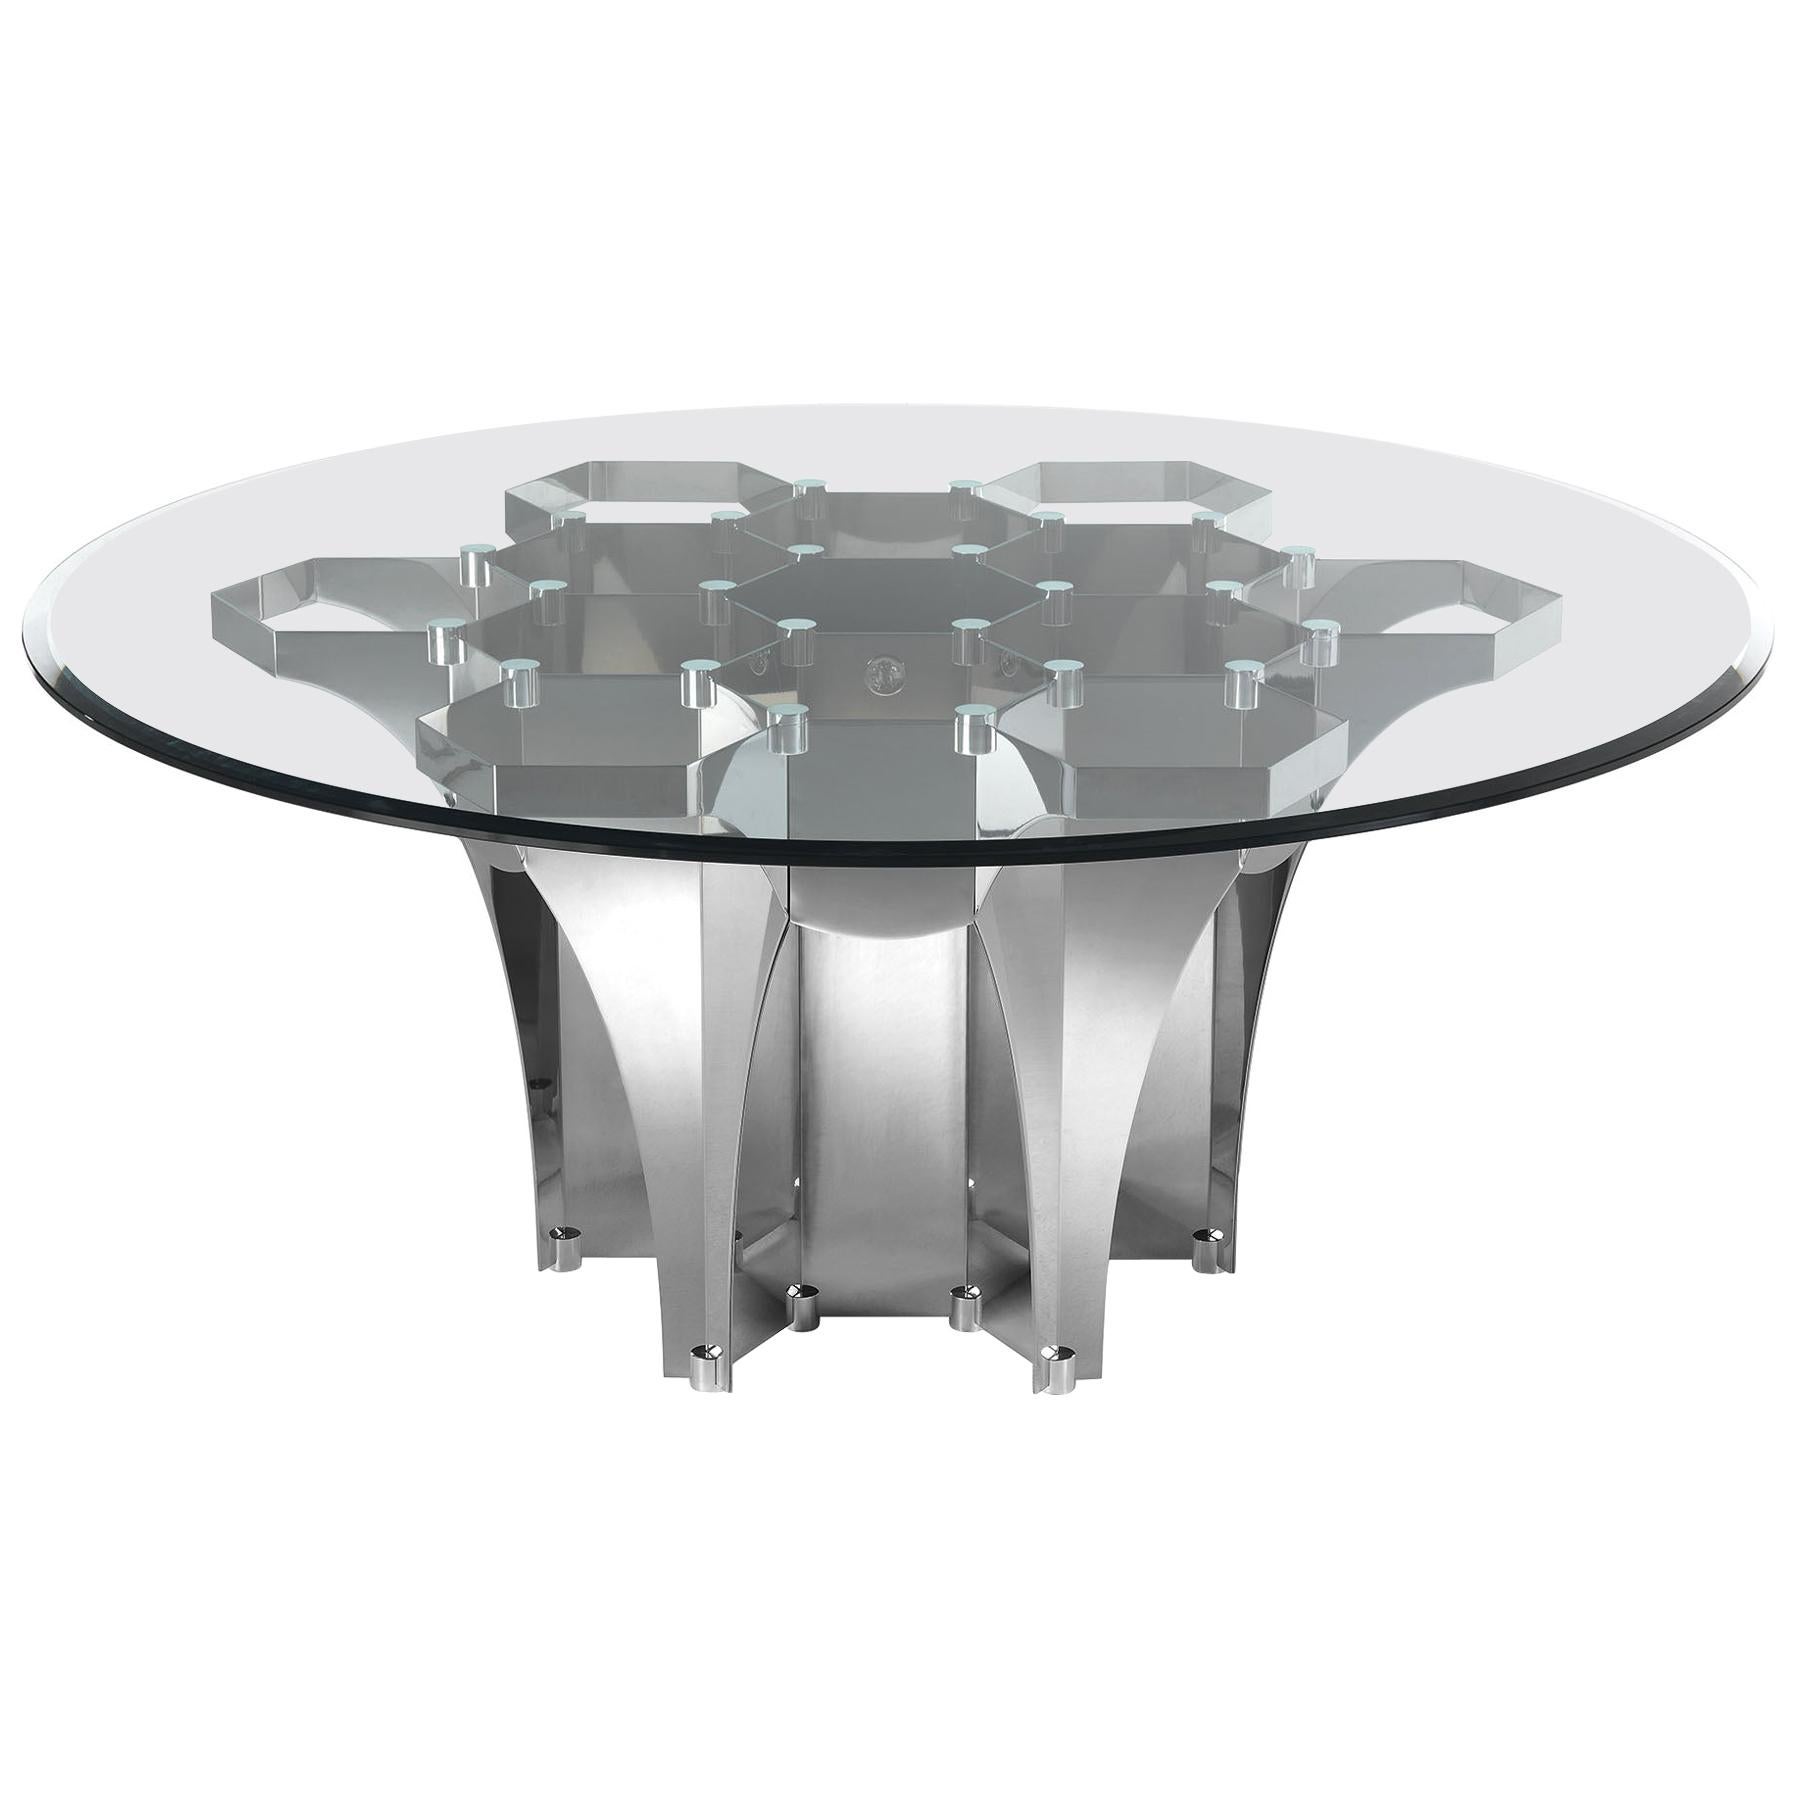 Soho Round Dining Table with Metal Base by Roberto Cavalli Home Interiors